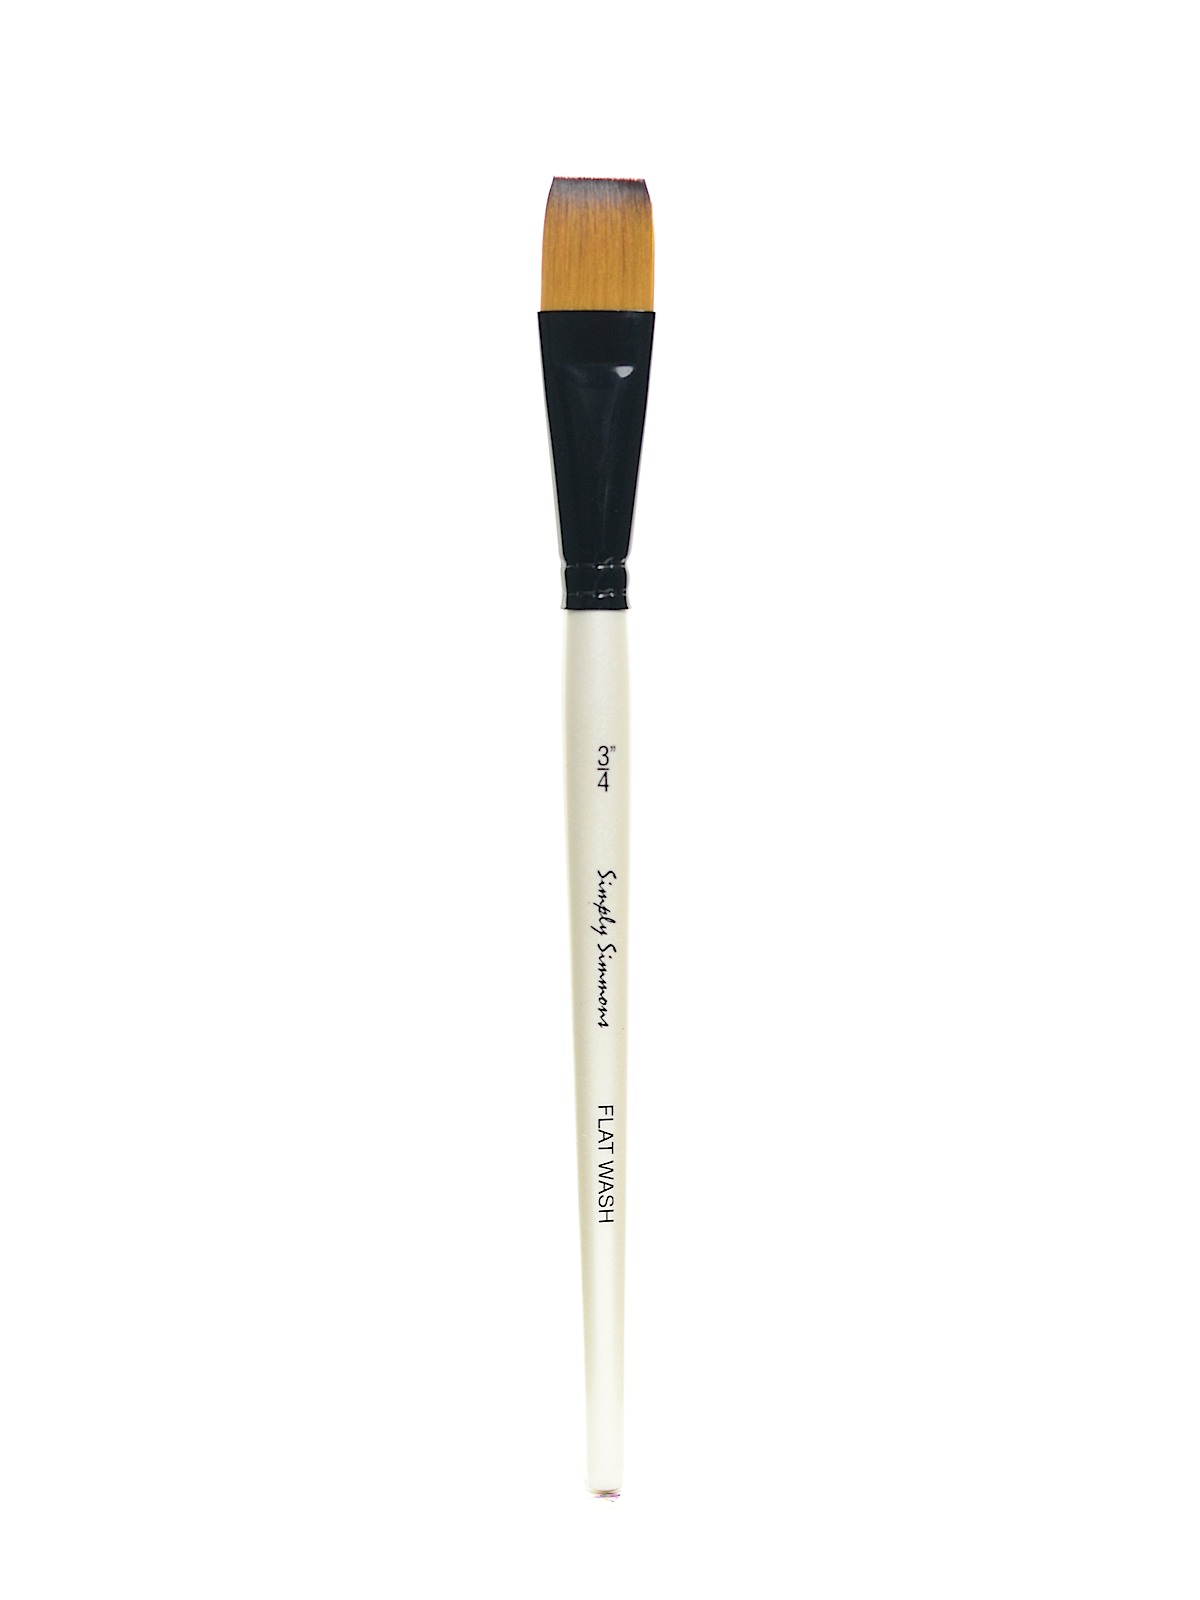 Simply Simmons Short Handle Brushes Flat Wash 3 4 In.